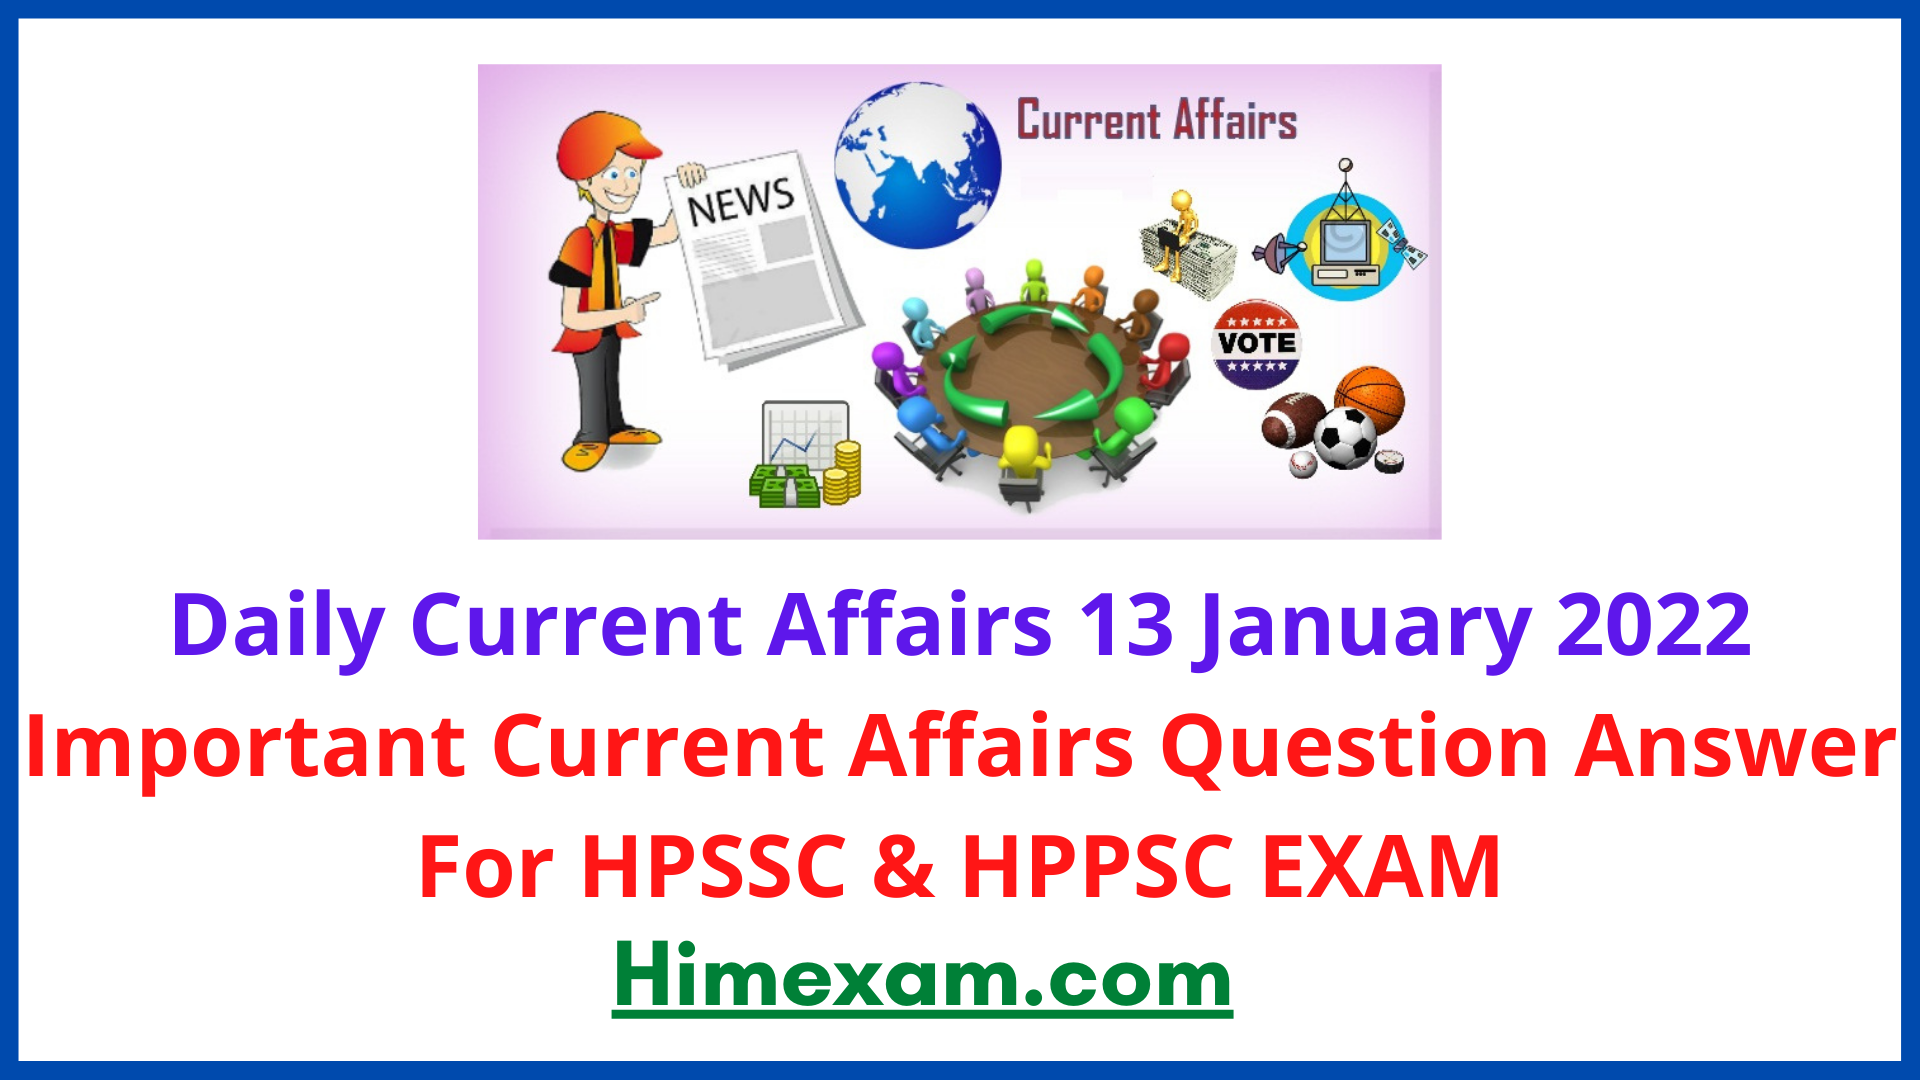 Daily Current Affairs 13 January 2022